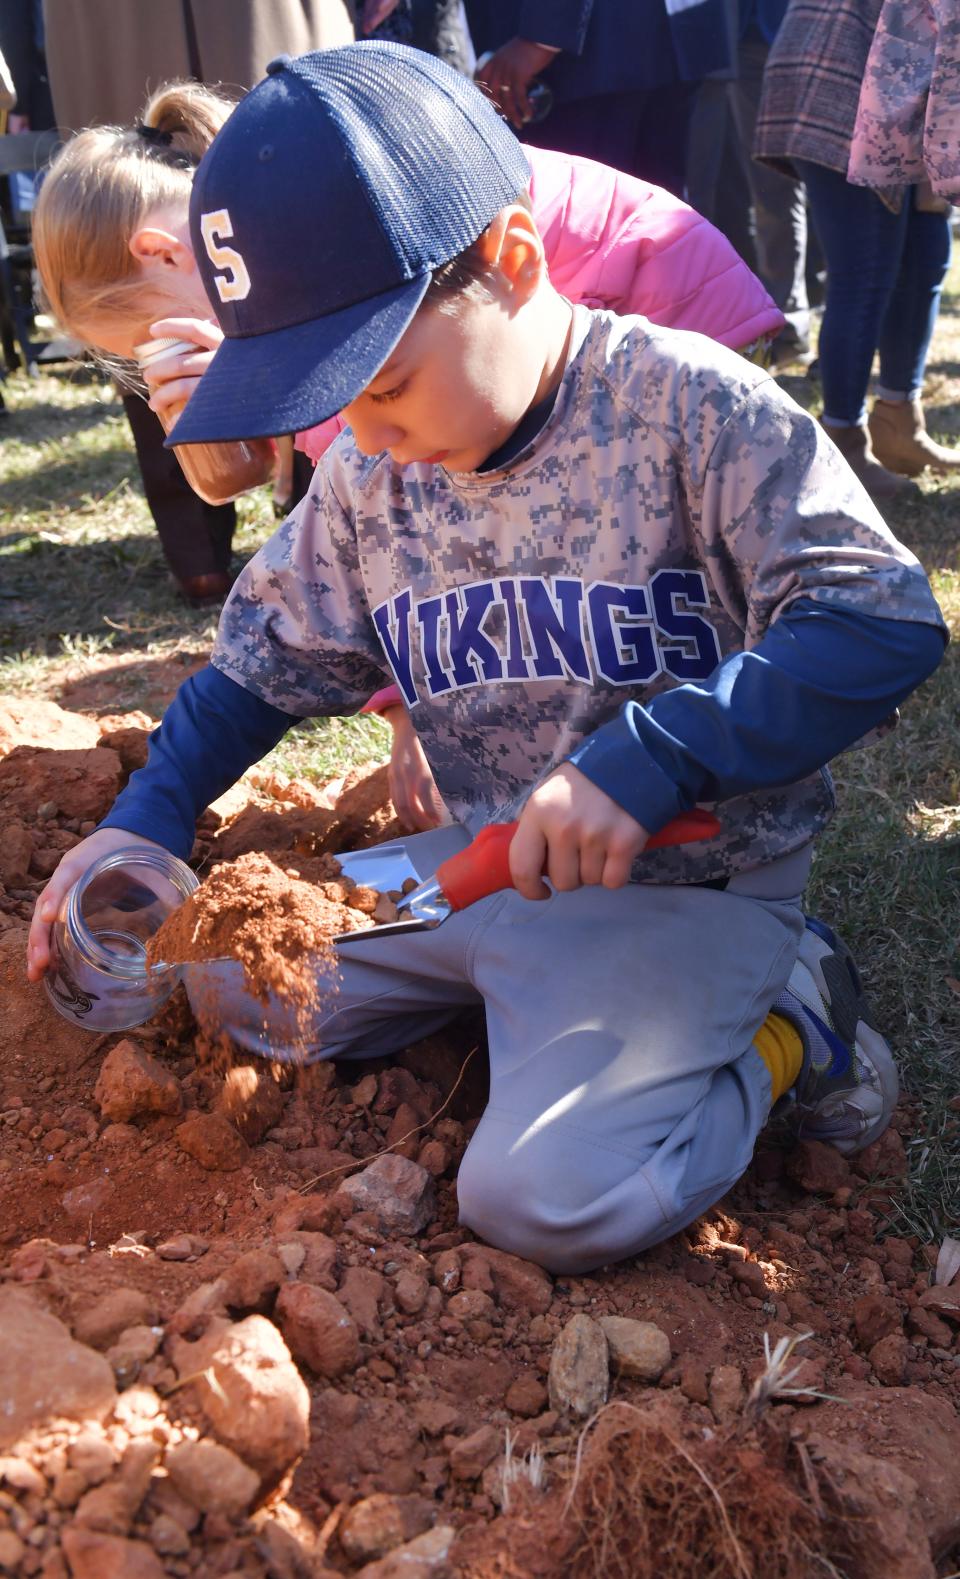 A groundbreaking ceremony was held for the baseball stadium in downtown Spartanburg on Nov. 1, 2023. Bennett Boles of the 6 and under Hillbrook Vikings baseball collects his soil as a souvenir at the groundbreaking.